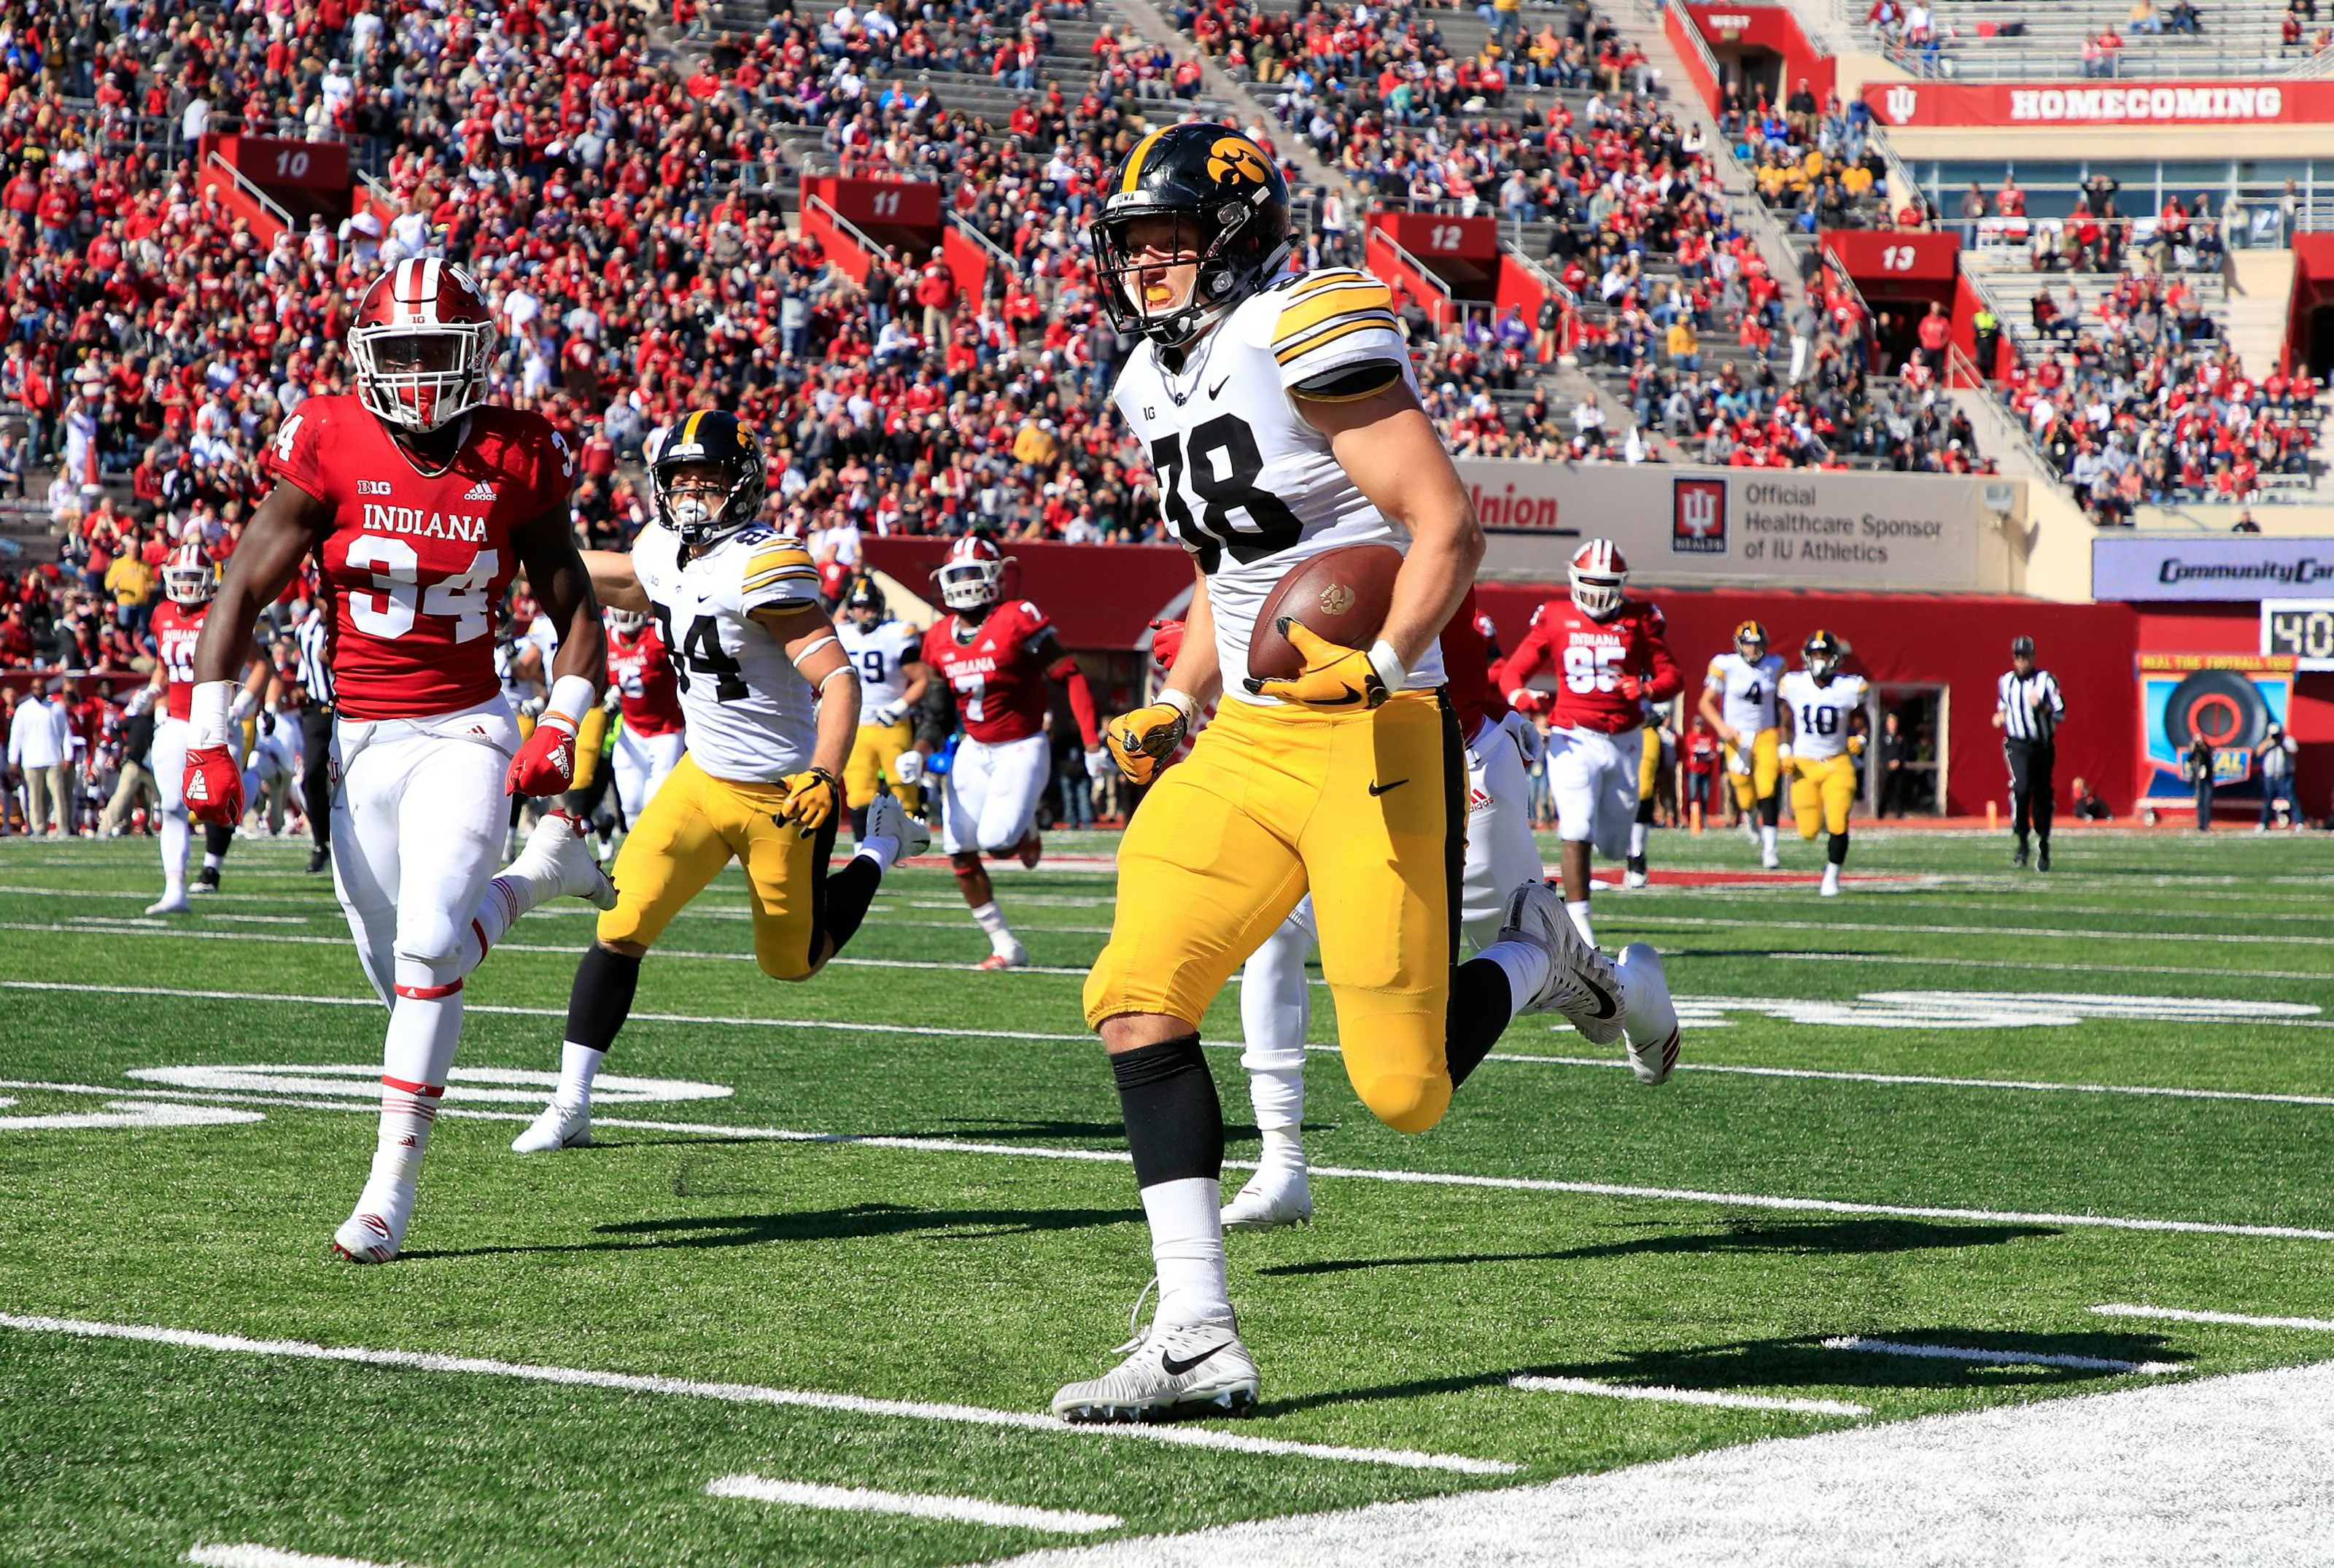 iowa-football-three-hawkeyes-collect-game-balls-in-win-over-indiana